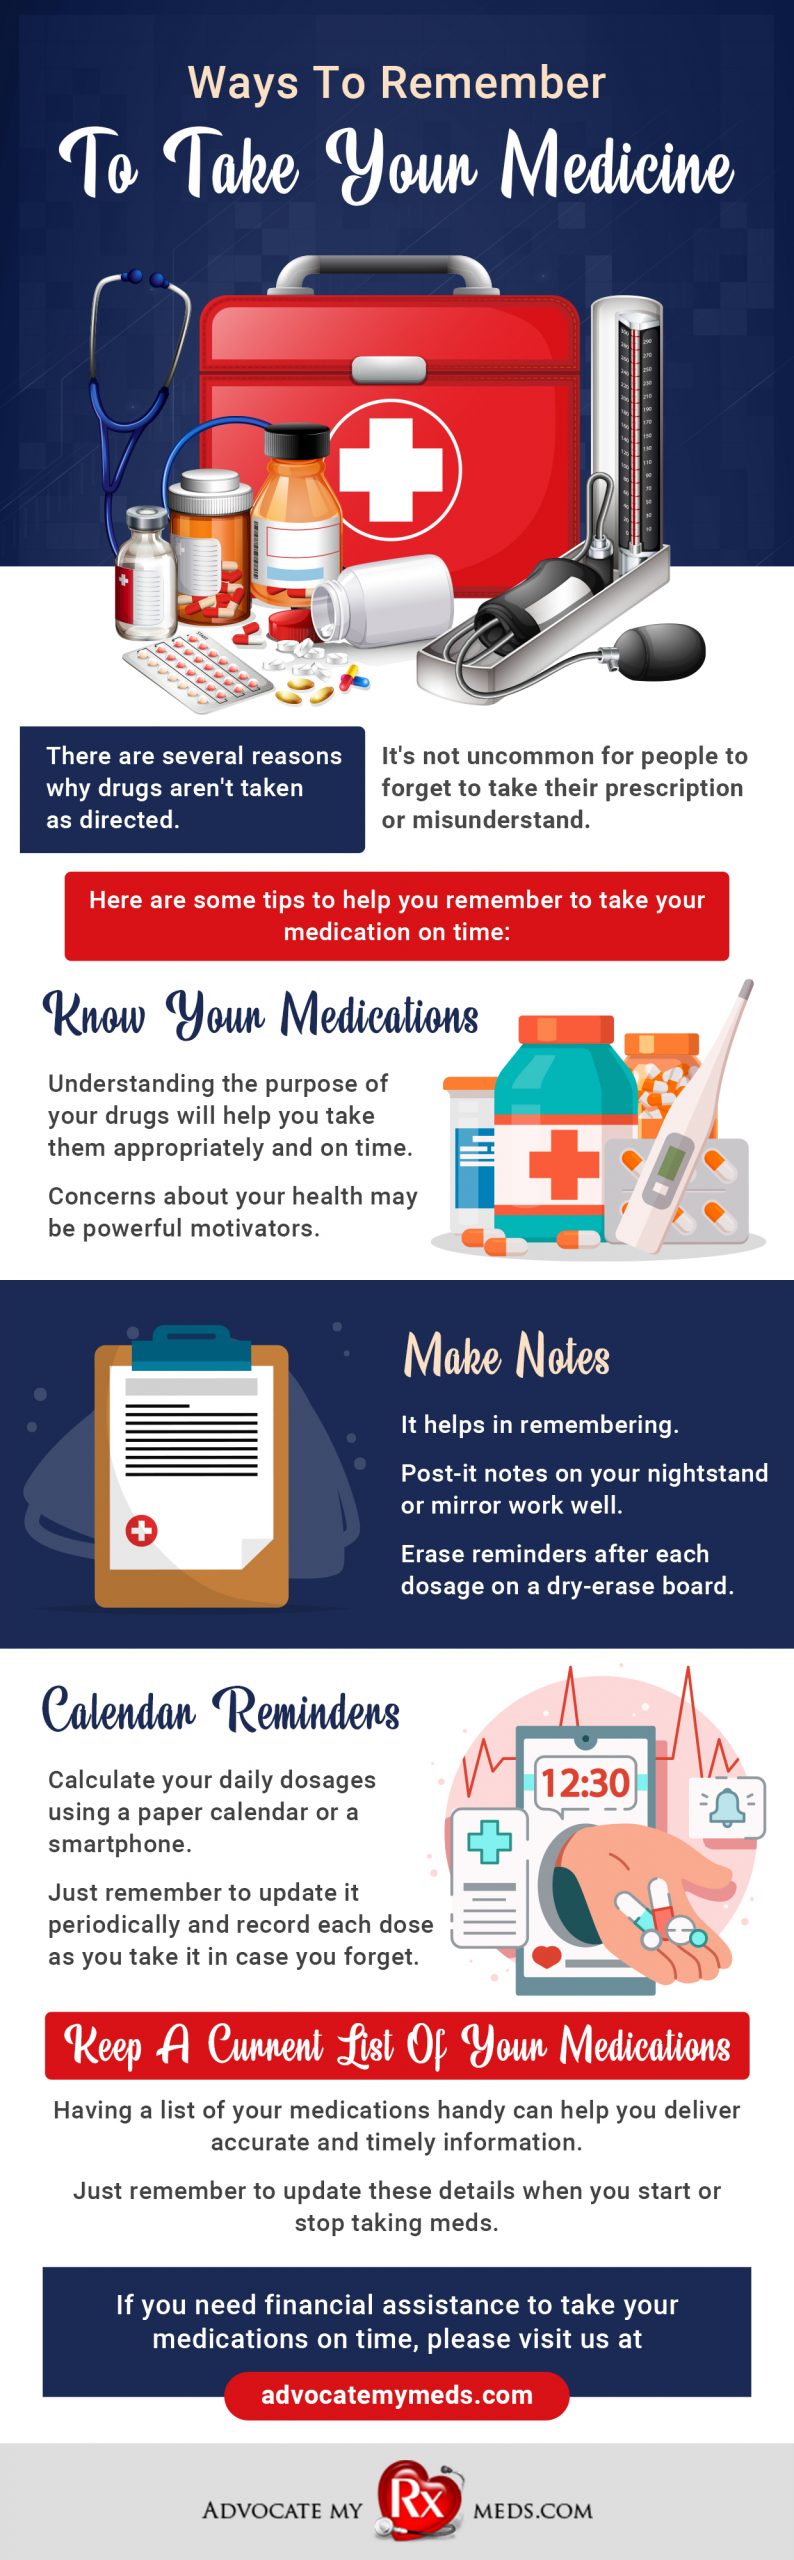 Ways to remember to take your medicine